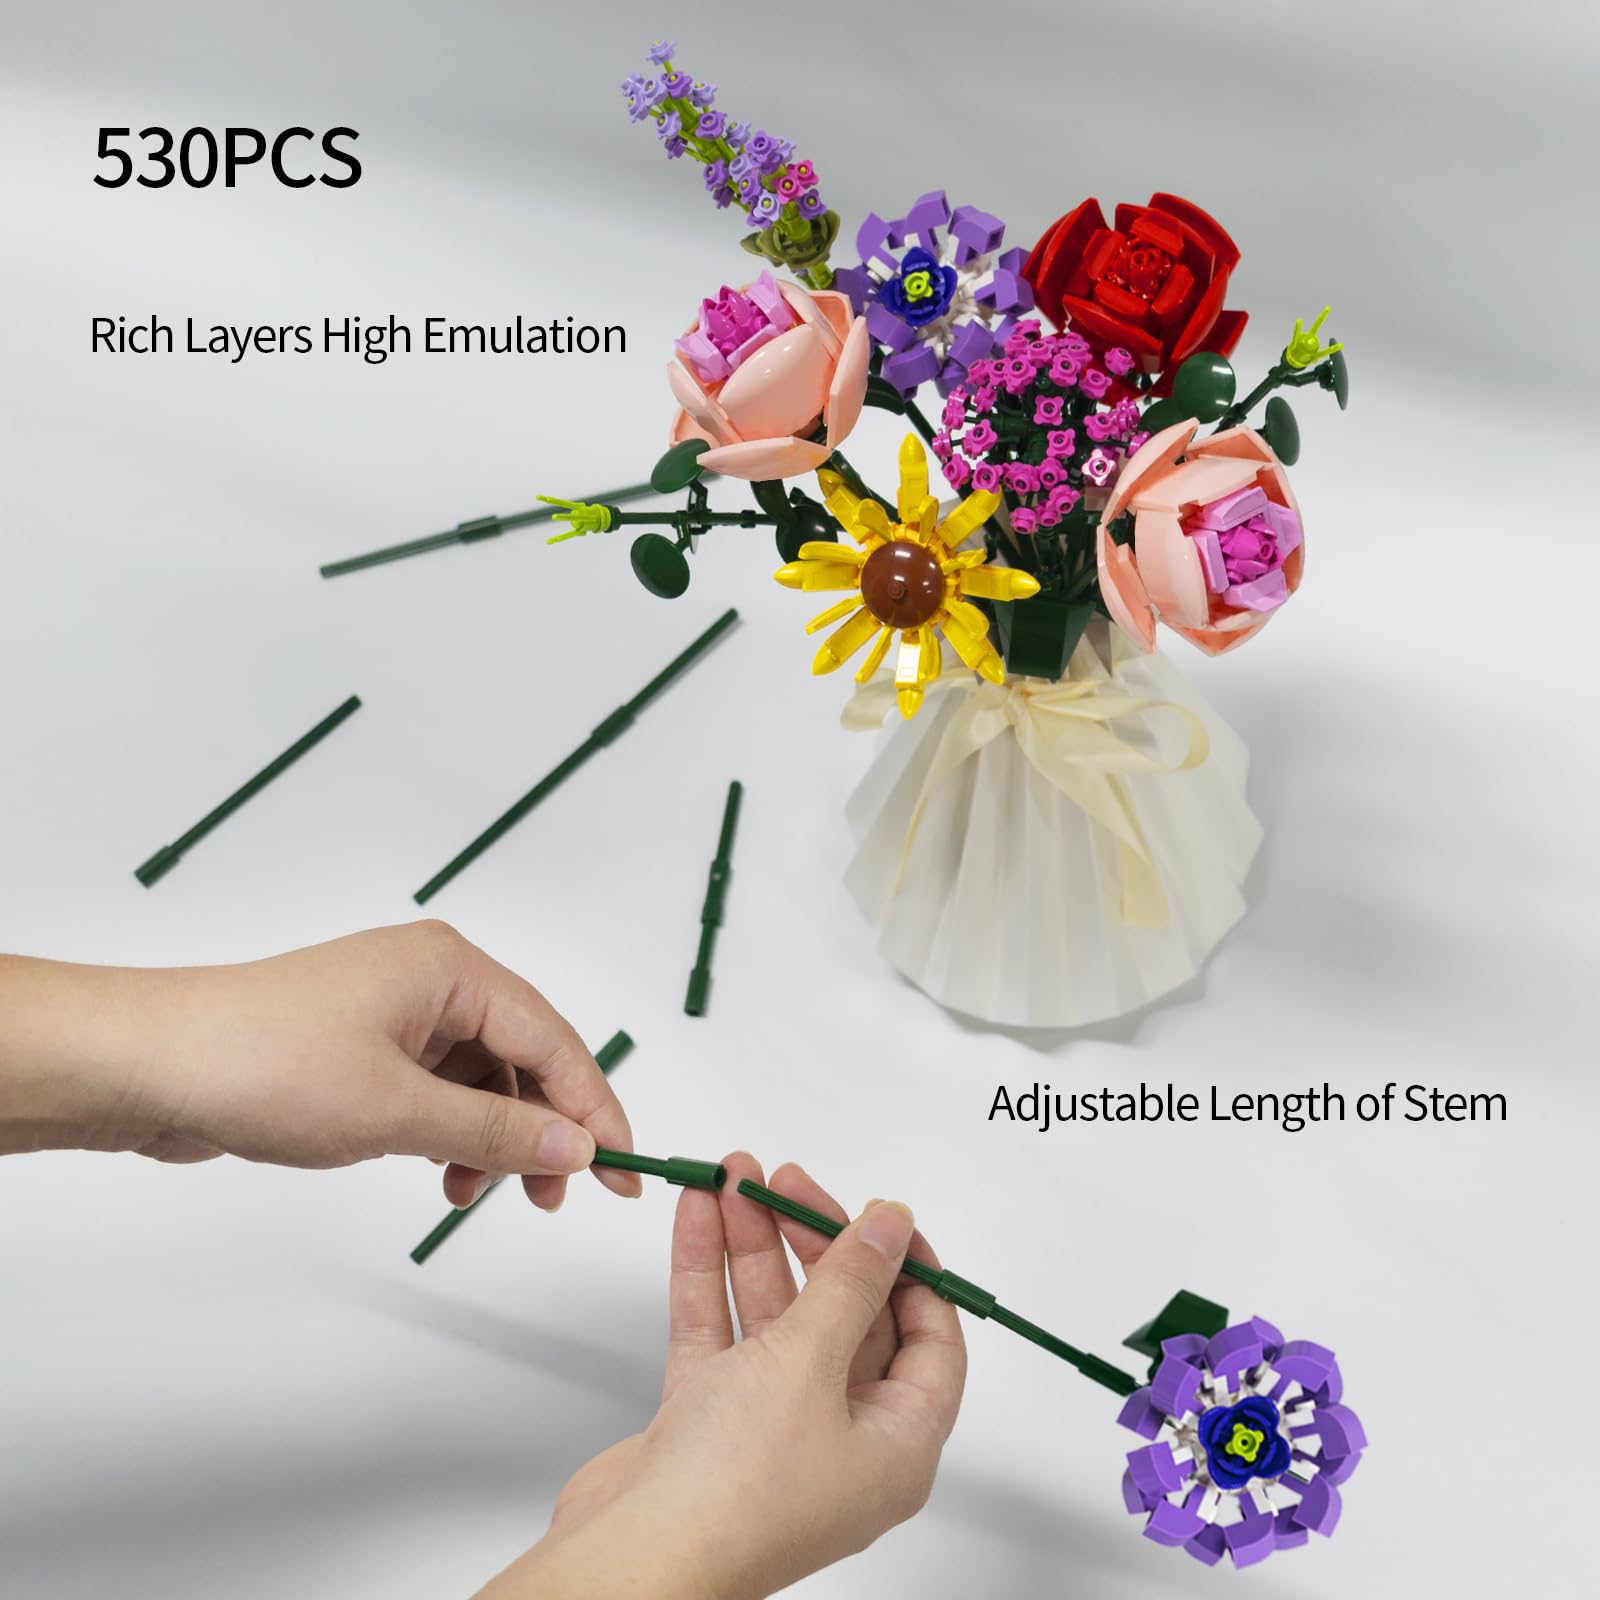 UJYY 2023 Flower Bouquet Building Kit, 11 Artificial Flowers Building Toys, 530 PCS Flower Building Blocks with Vase, Botanical Collection for Home Decoration, Gifts for Women Mother Kids 6+Ages